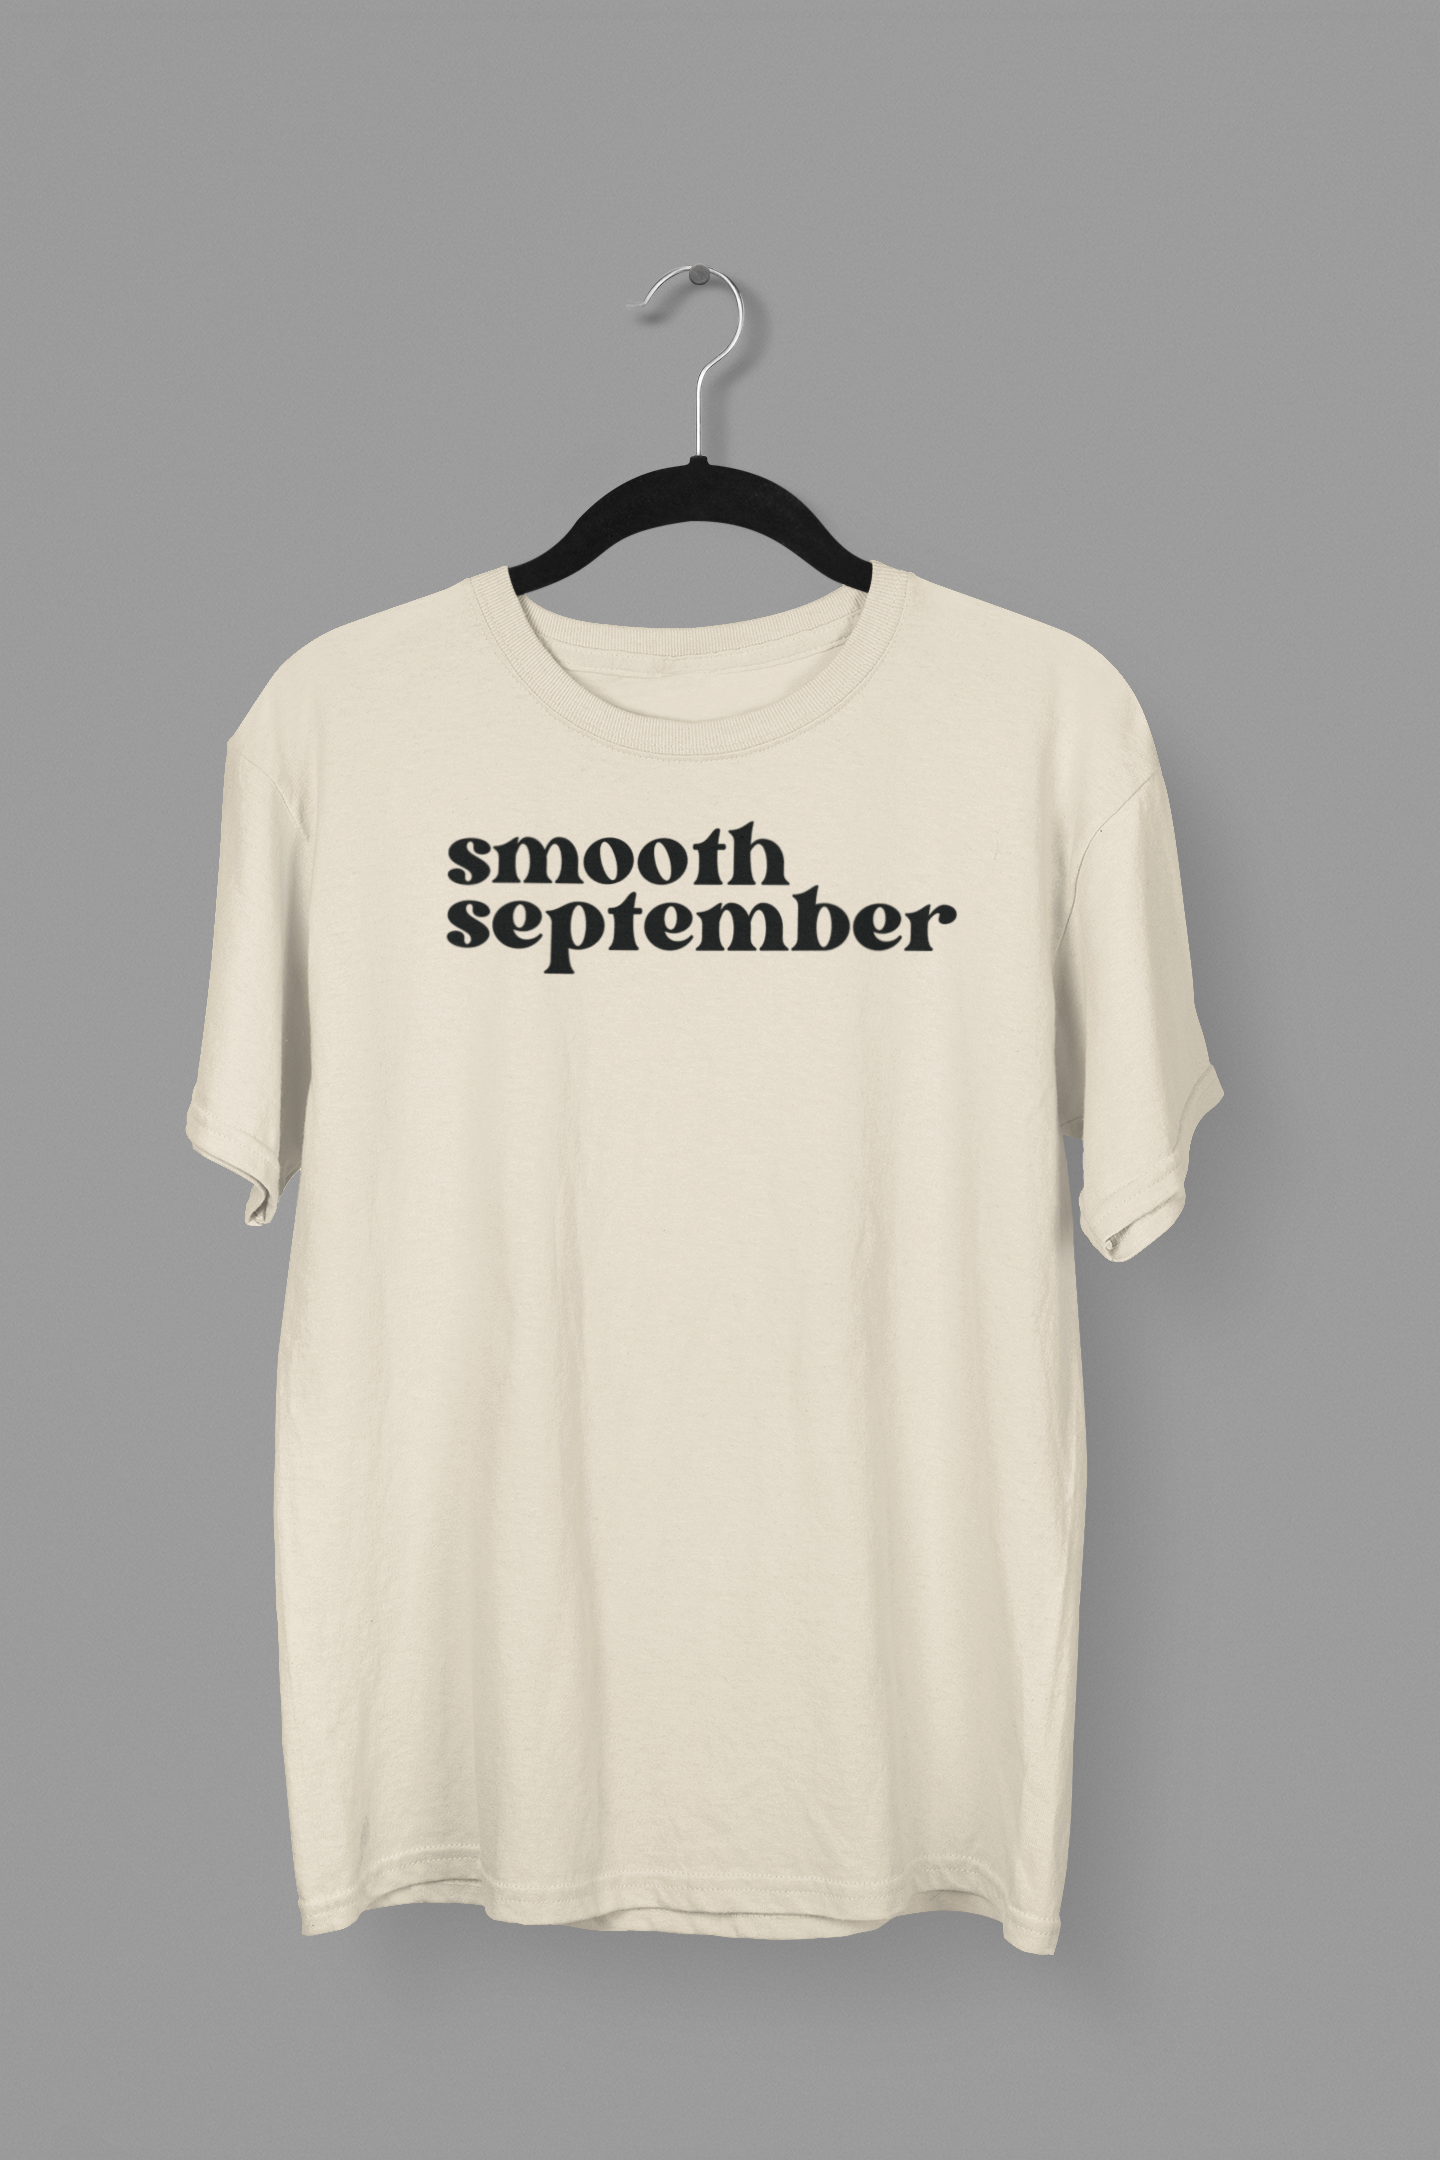 Smooth September t-shirtRep Smooth September with our new t-shirts! This unisex shirt is great for warm weather or layering during the colder months. With fabric that breathes and is comforSmooth September, LLCMerchandiset-shirt & tops